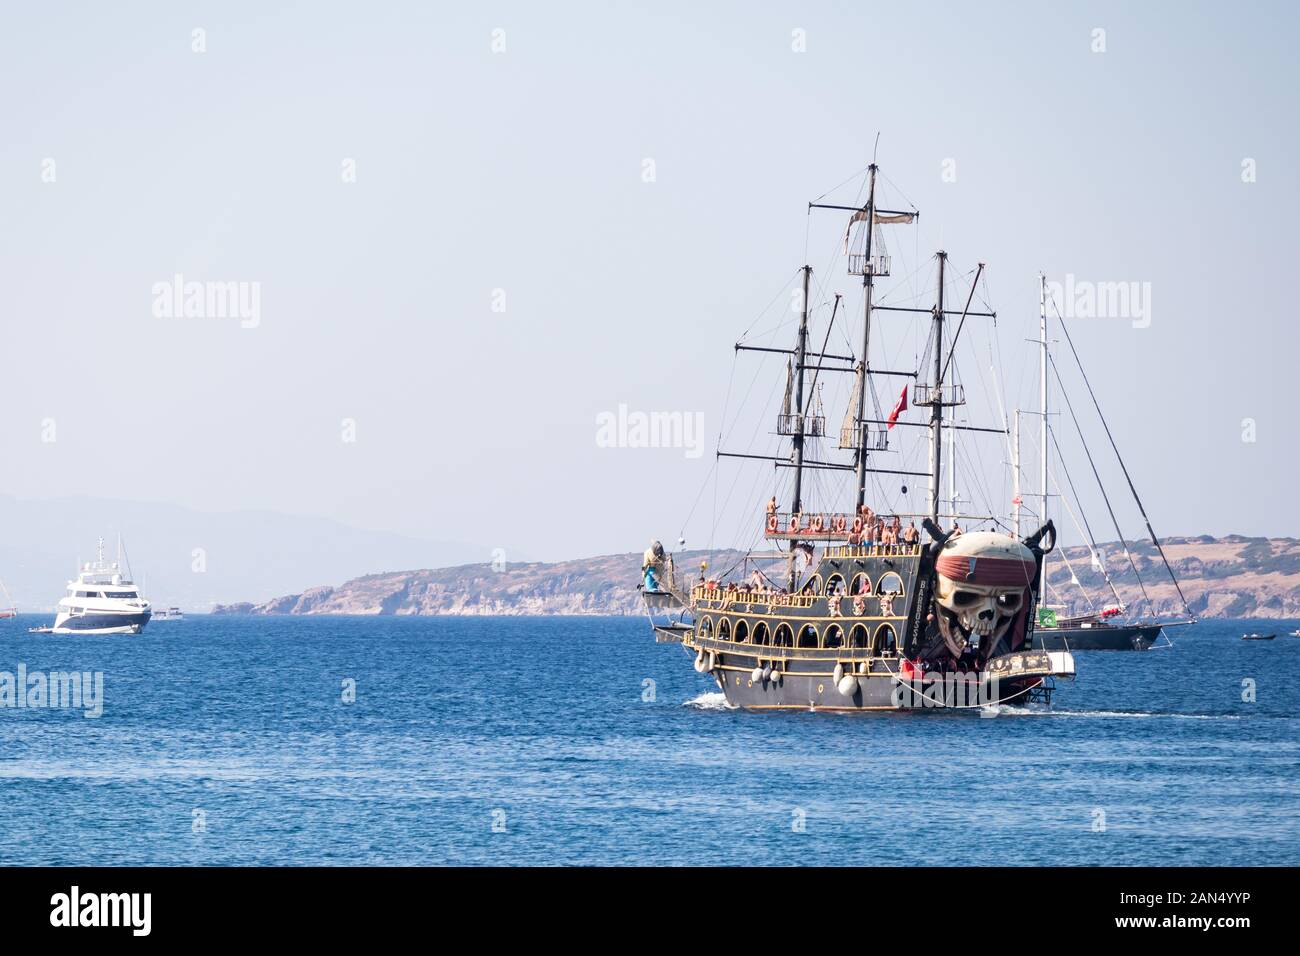 Bodrum, Turkey - September 16th 2019: Pirate ship boat tour heading out of the harbour, Boat trips are a popular tourist activity. Stock Photo